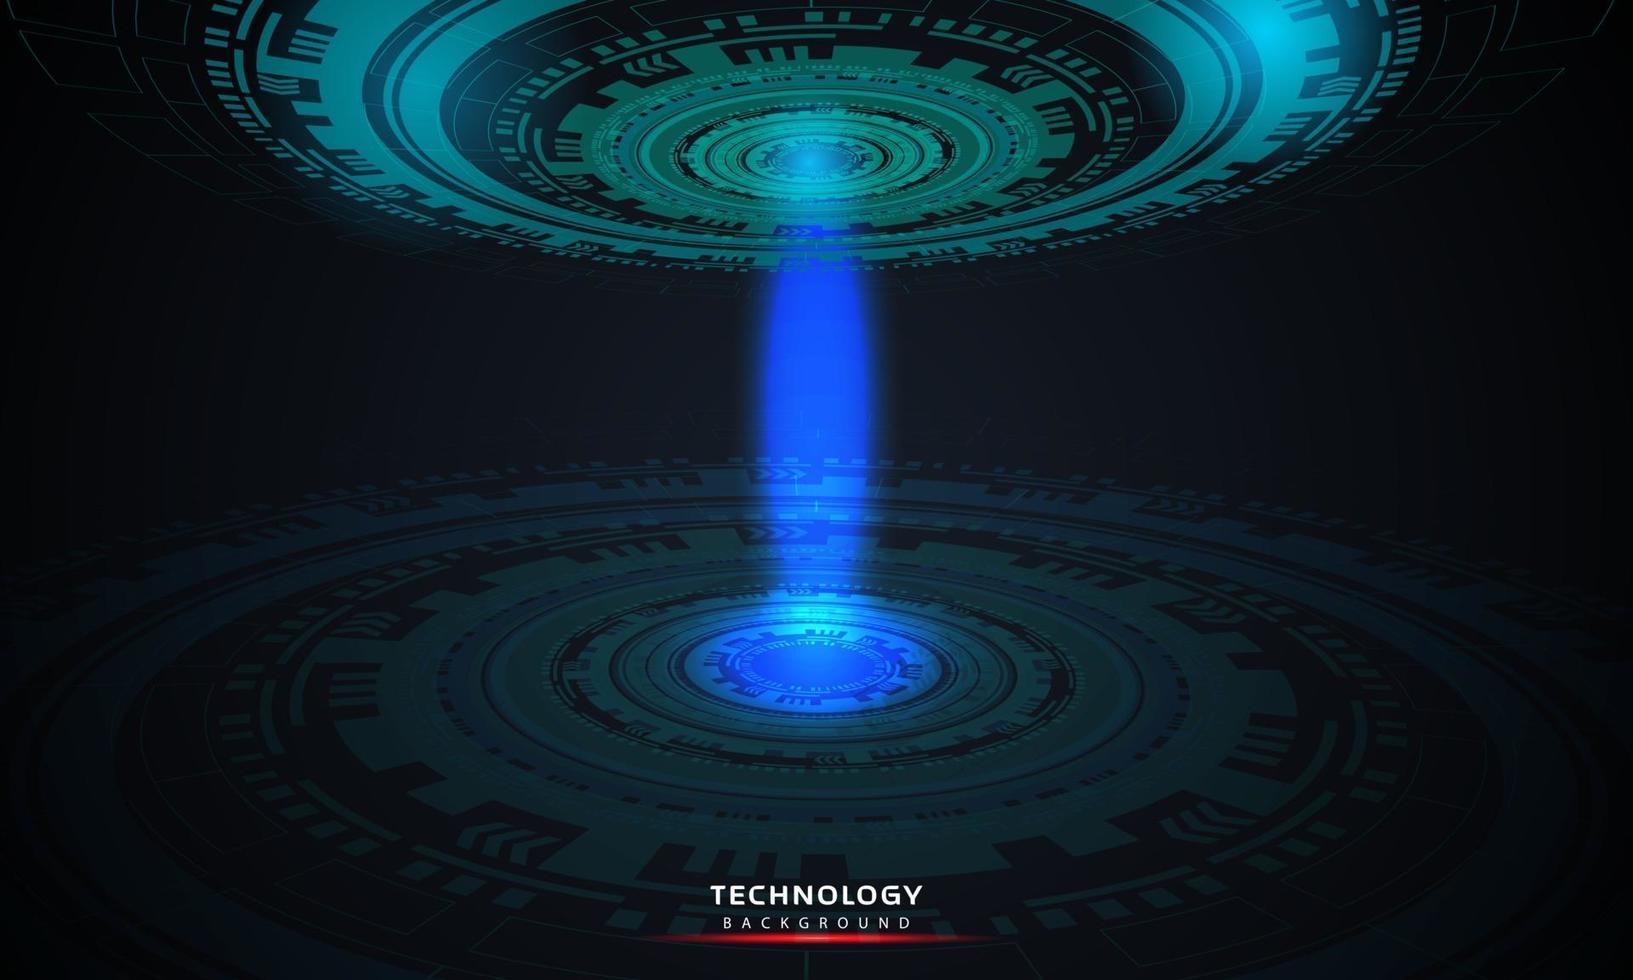 Technology background 01abstract background of round futuristic technology with HUD elements circle digital futuristic blue color gradient innovation of technology concepts. vector